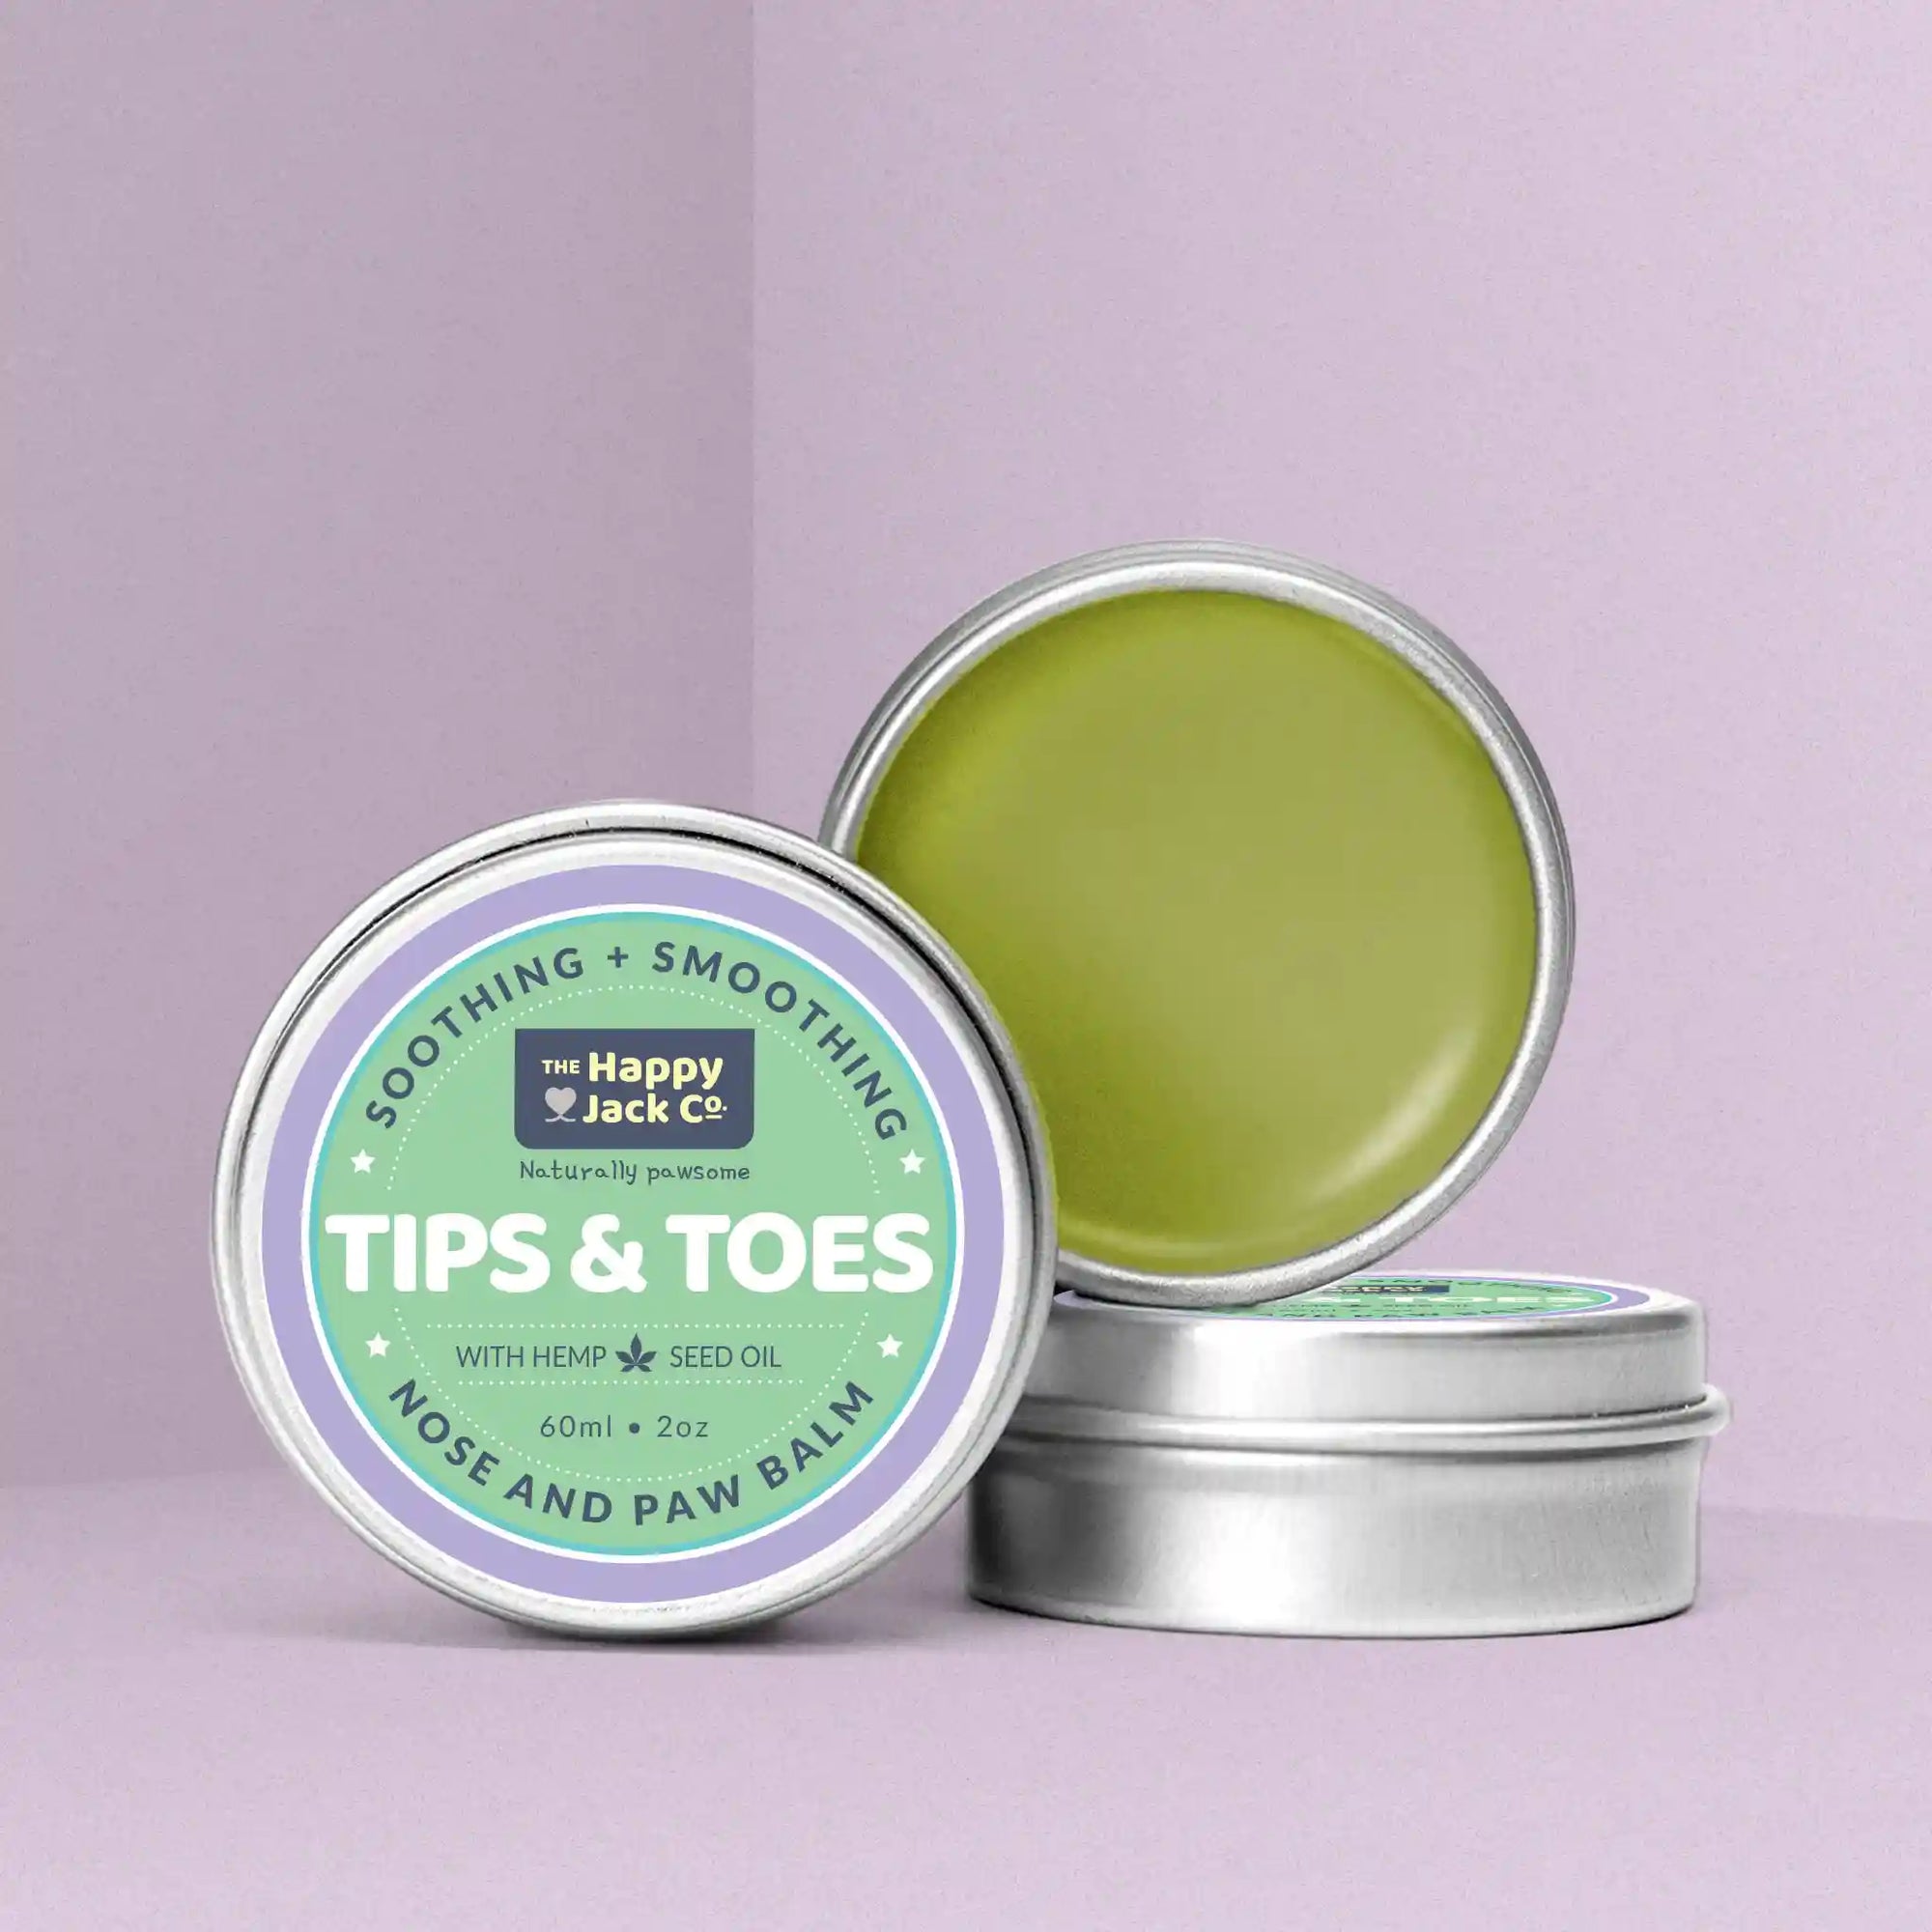 Natural nose, skin and paw balms for dogs.